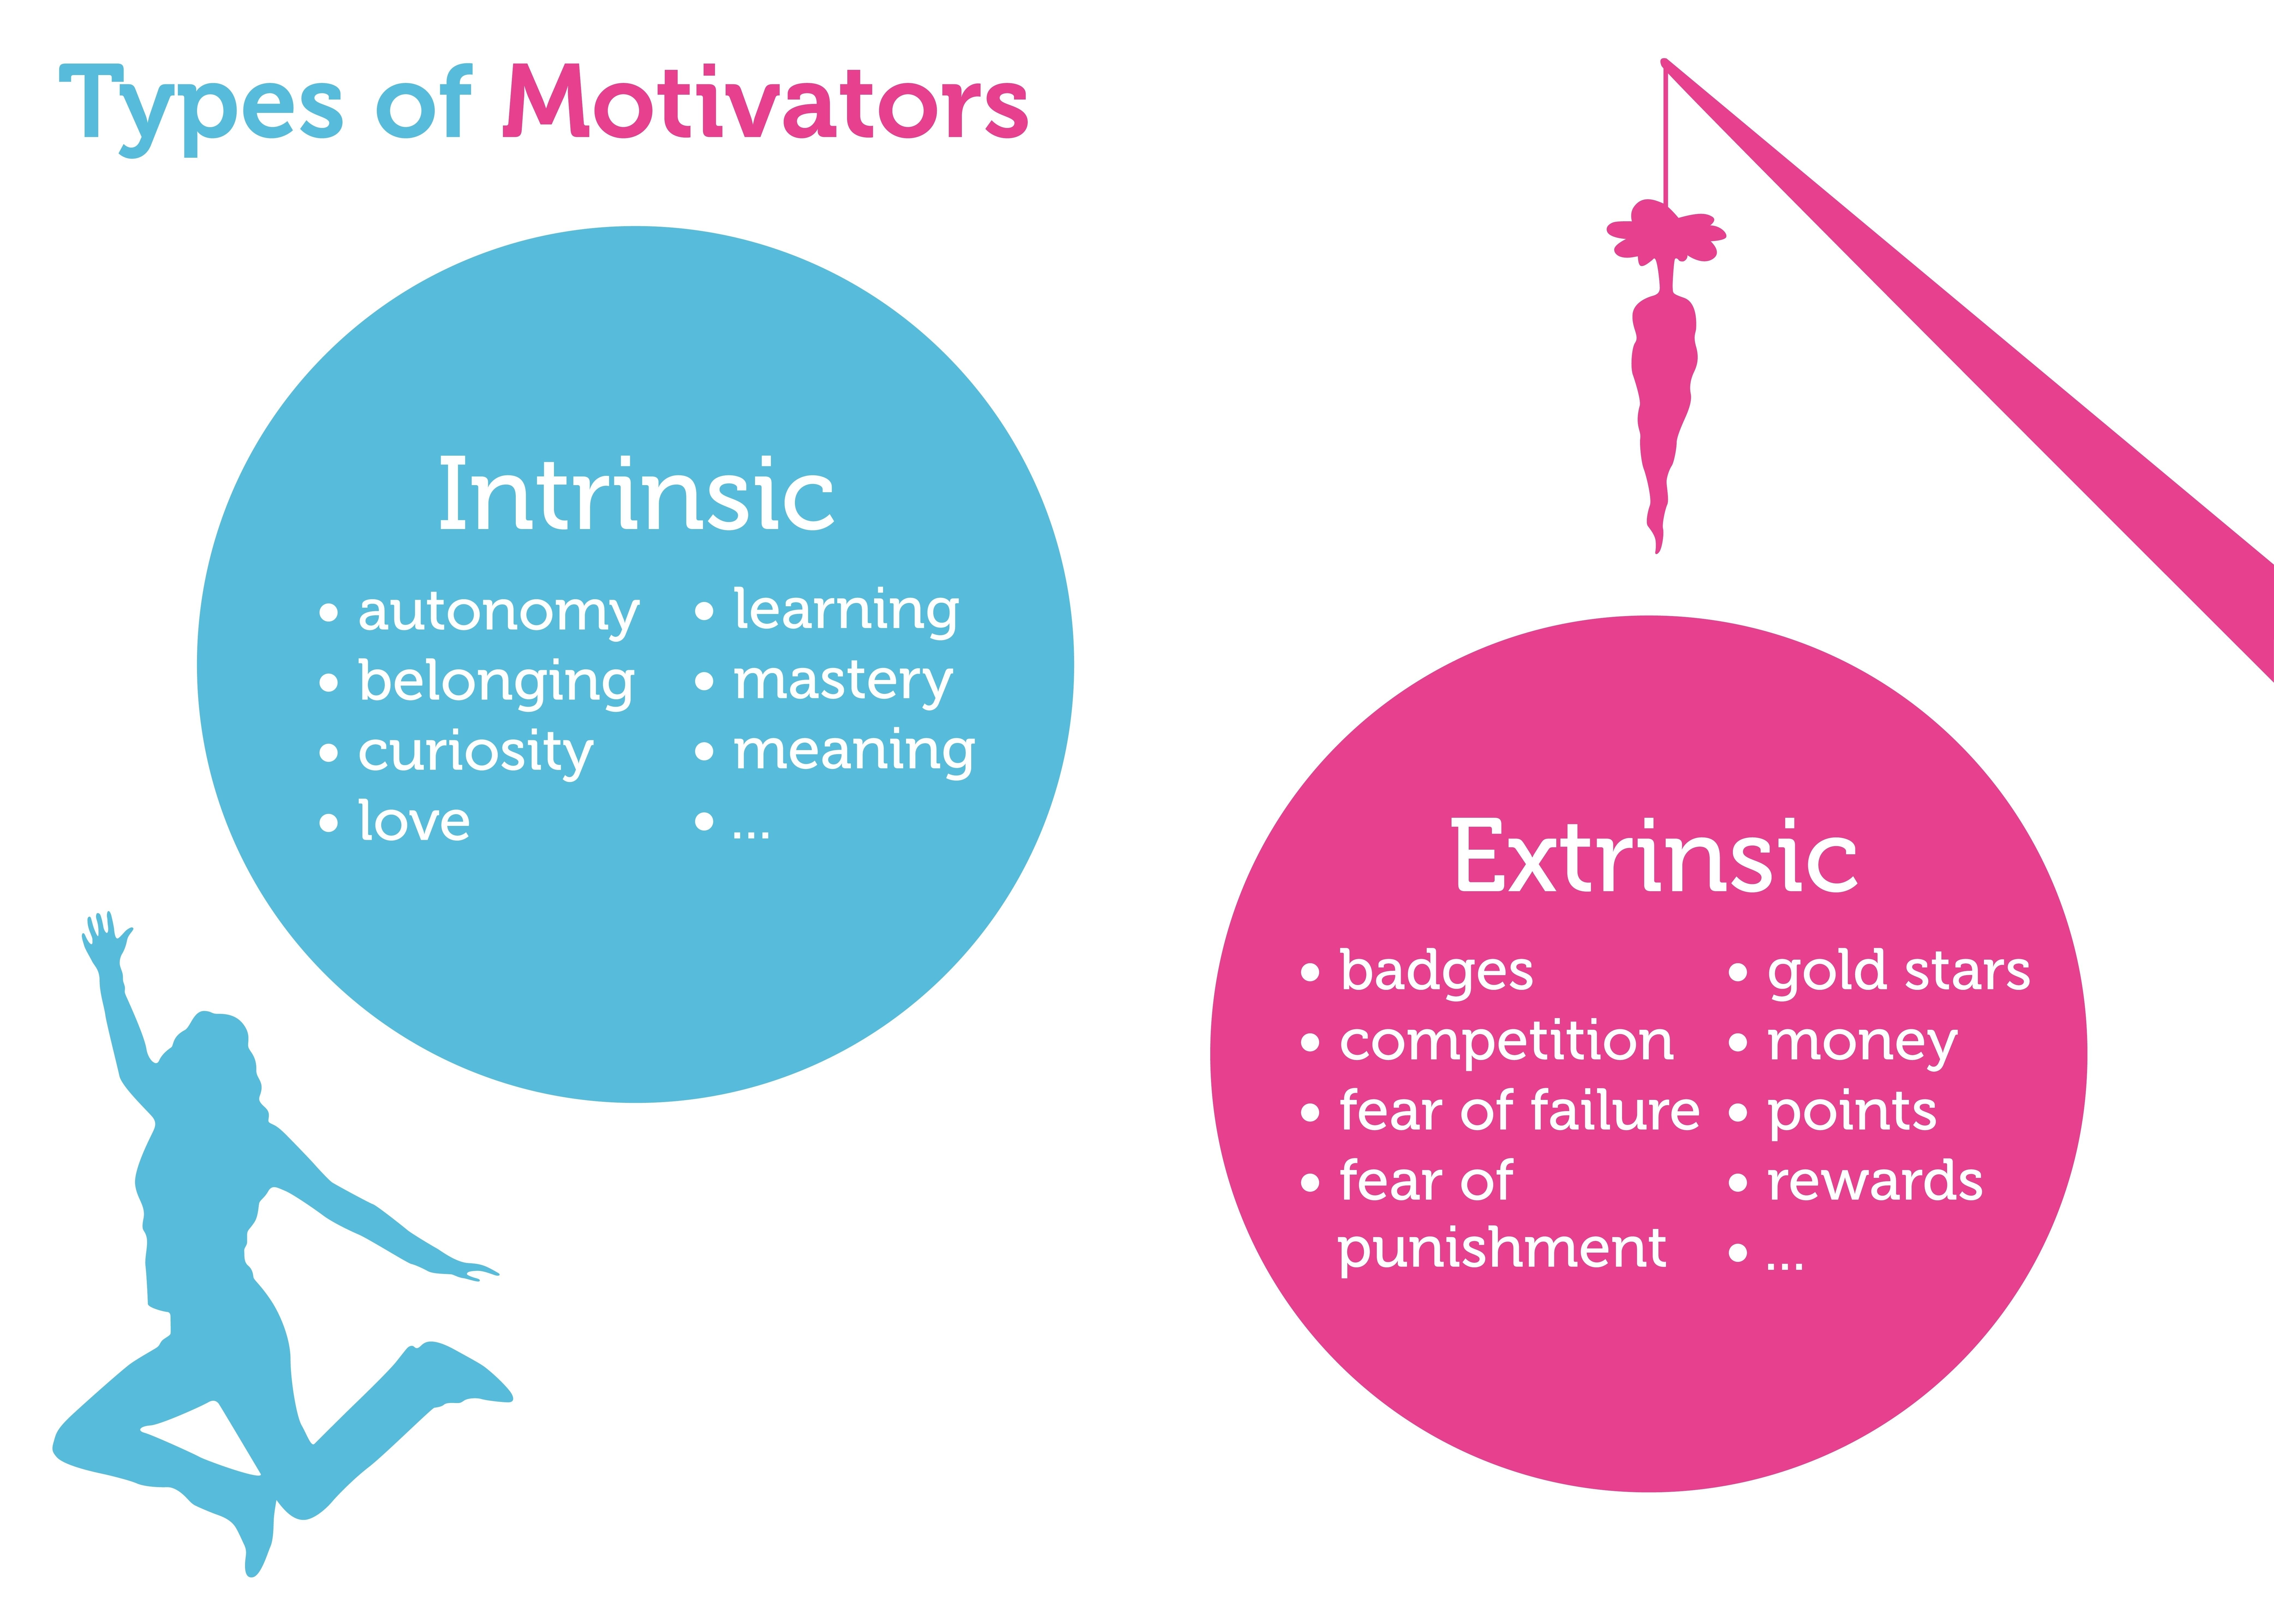 Kinds of competition. Types of Motivation. Extrinsic and intrinsic Motivation. Intrinsic Motivation and extrinsic Motivation. Types of extrinsic Motivation.